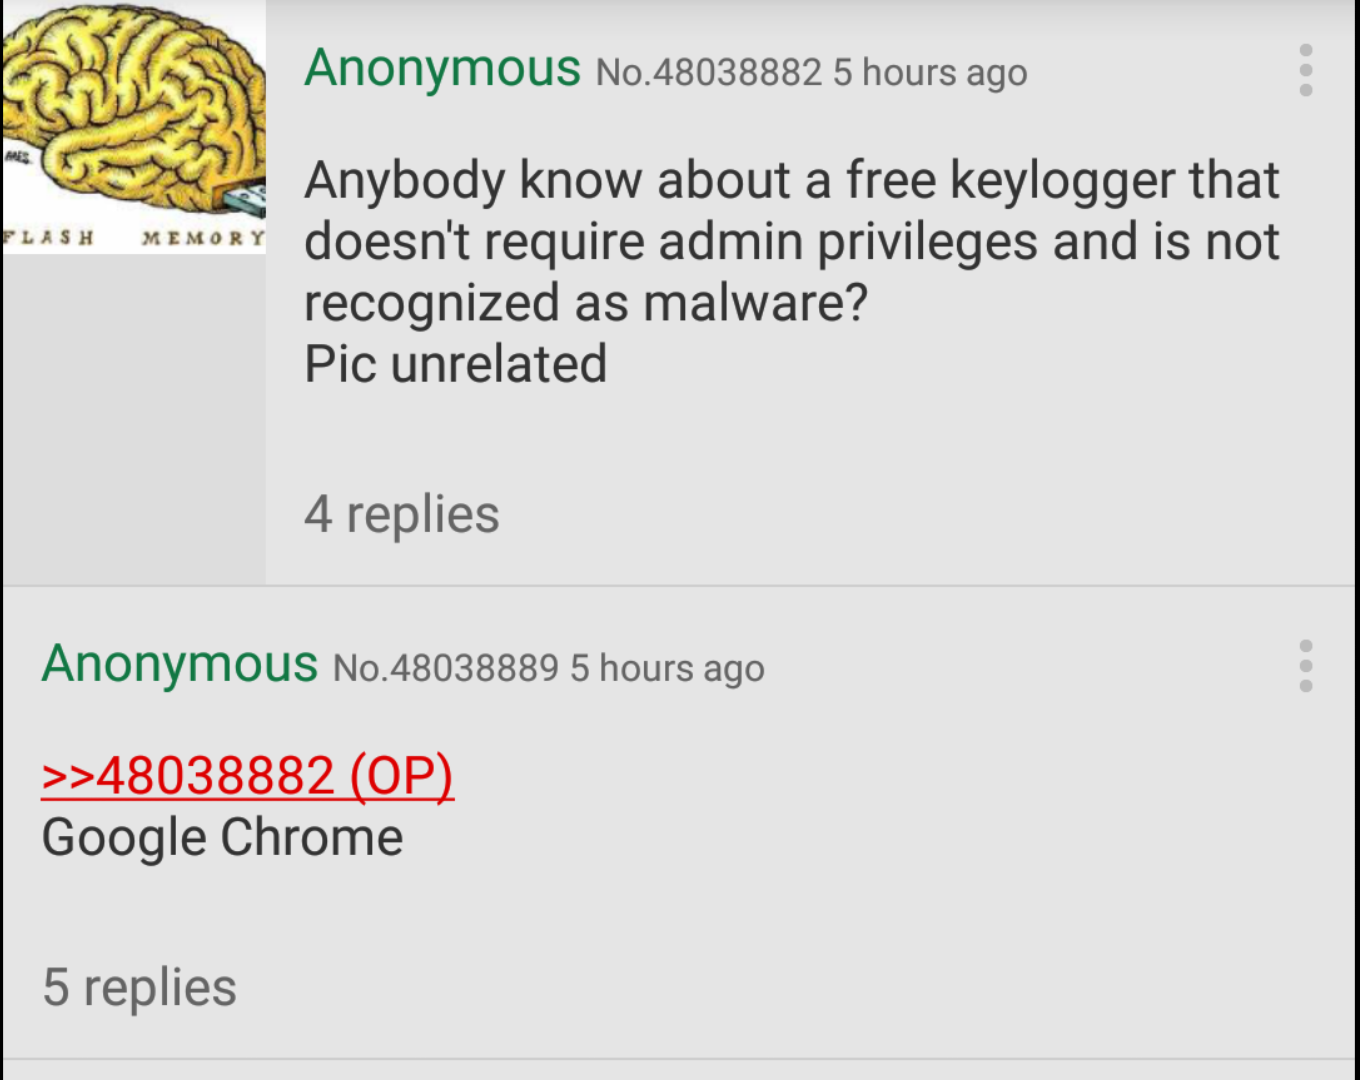 Anon recommends a keylogger